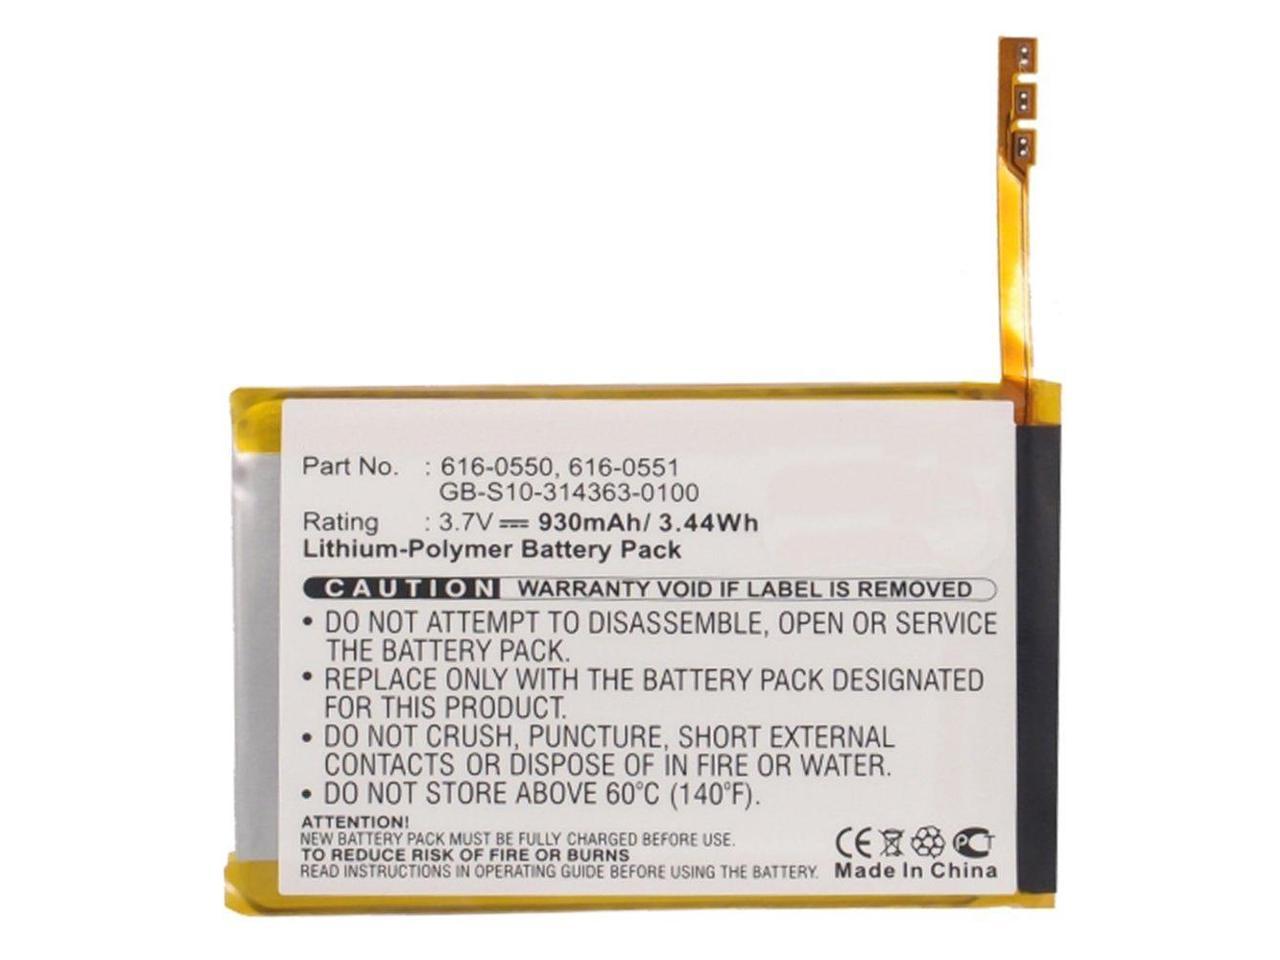 A1367 8GB SWARK Battery 616-0550 64GB with Tools 32GB 16GB 616-0551 Compatible with iPod Touch 4 4th Generation 